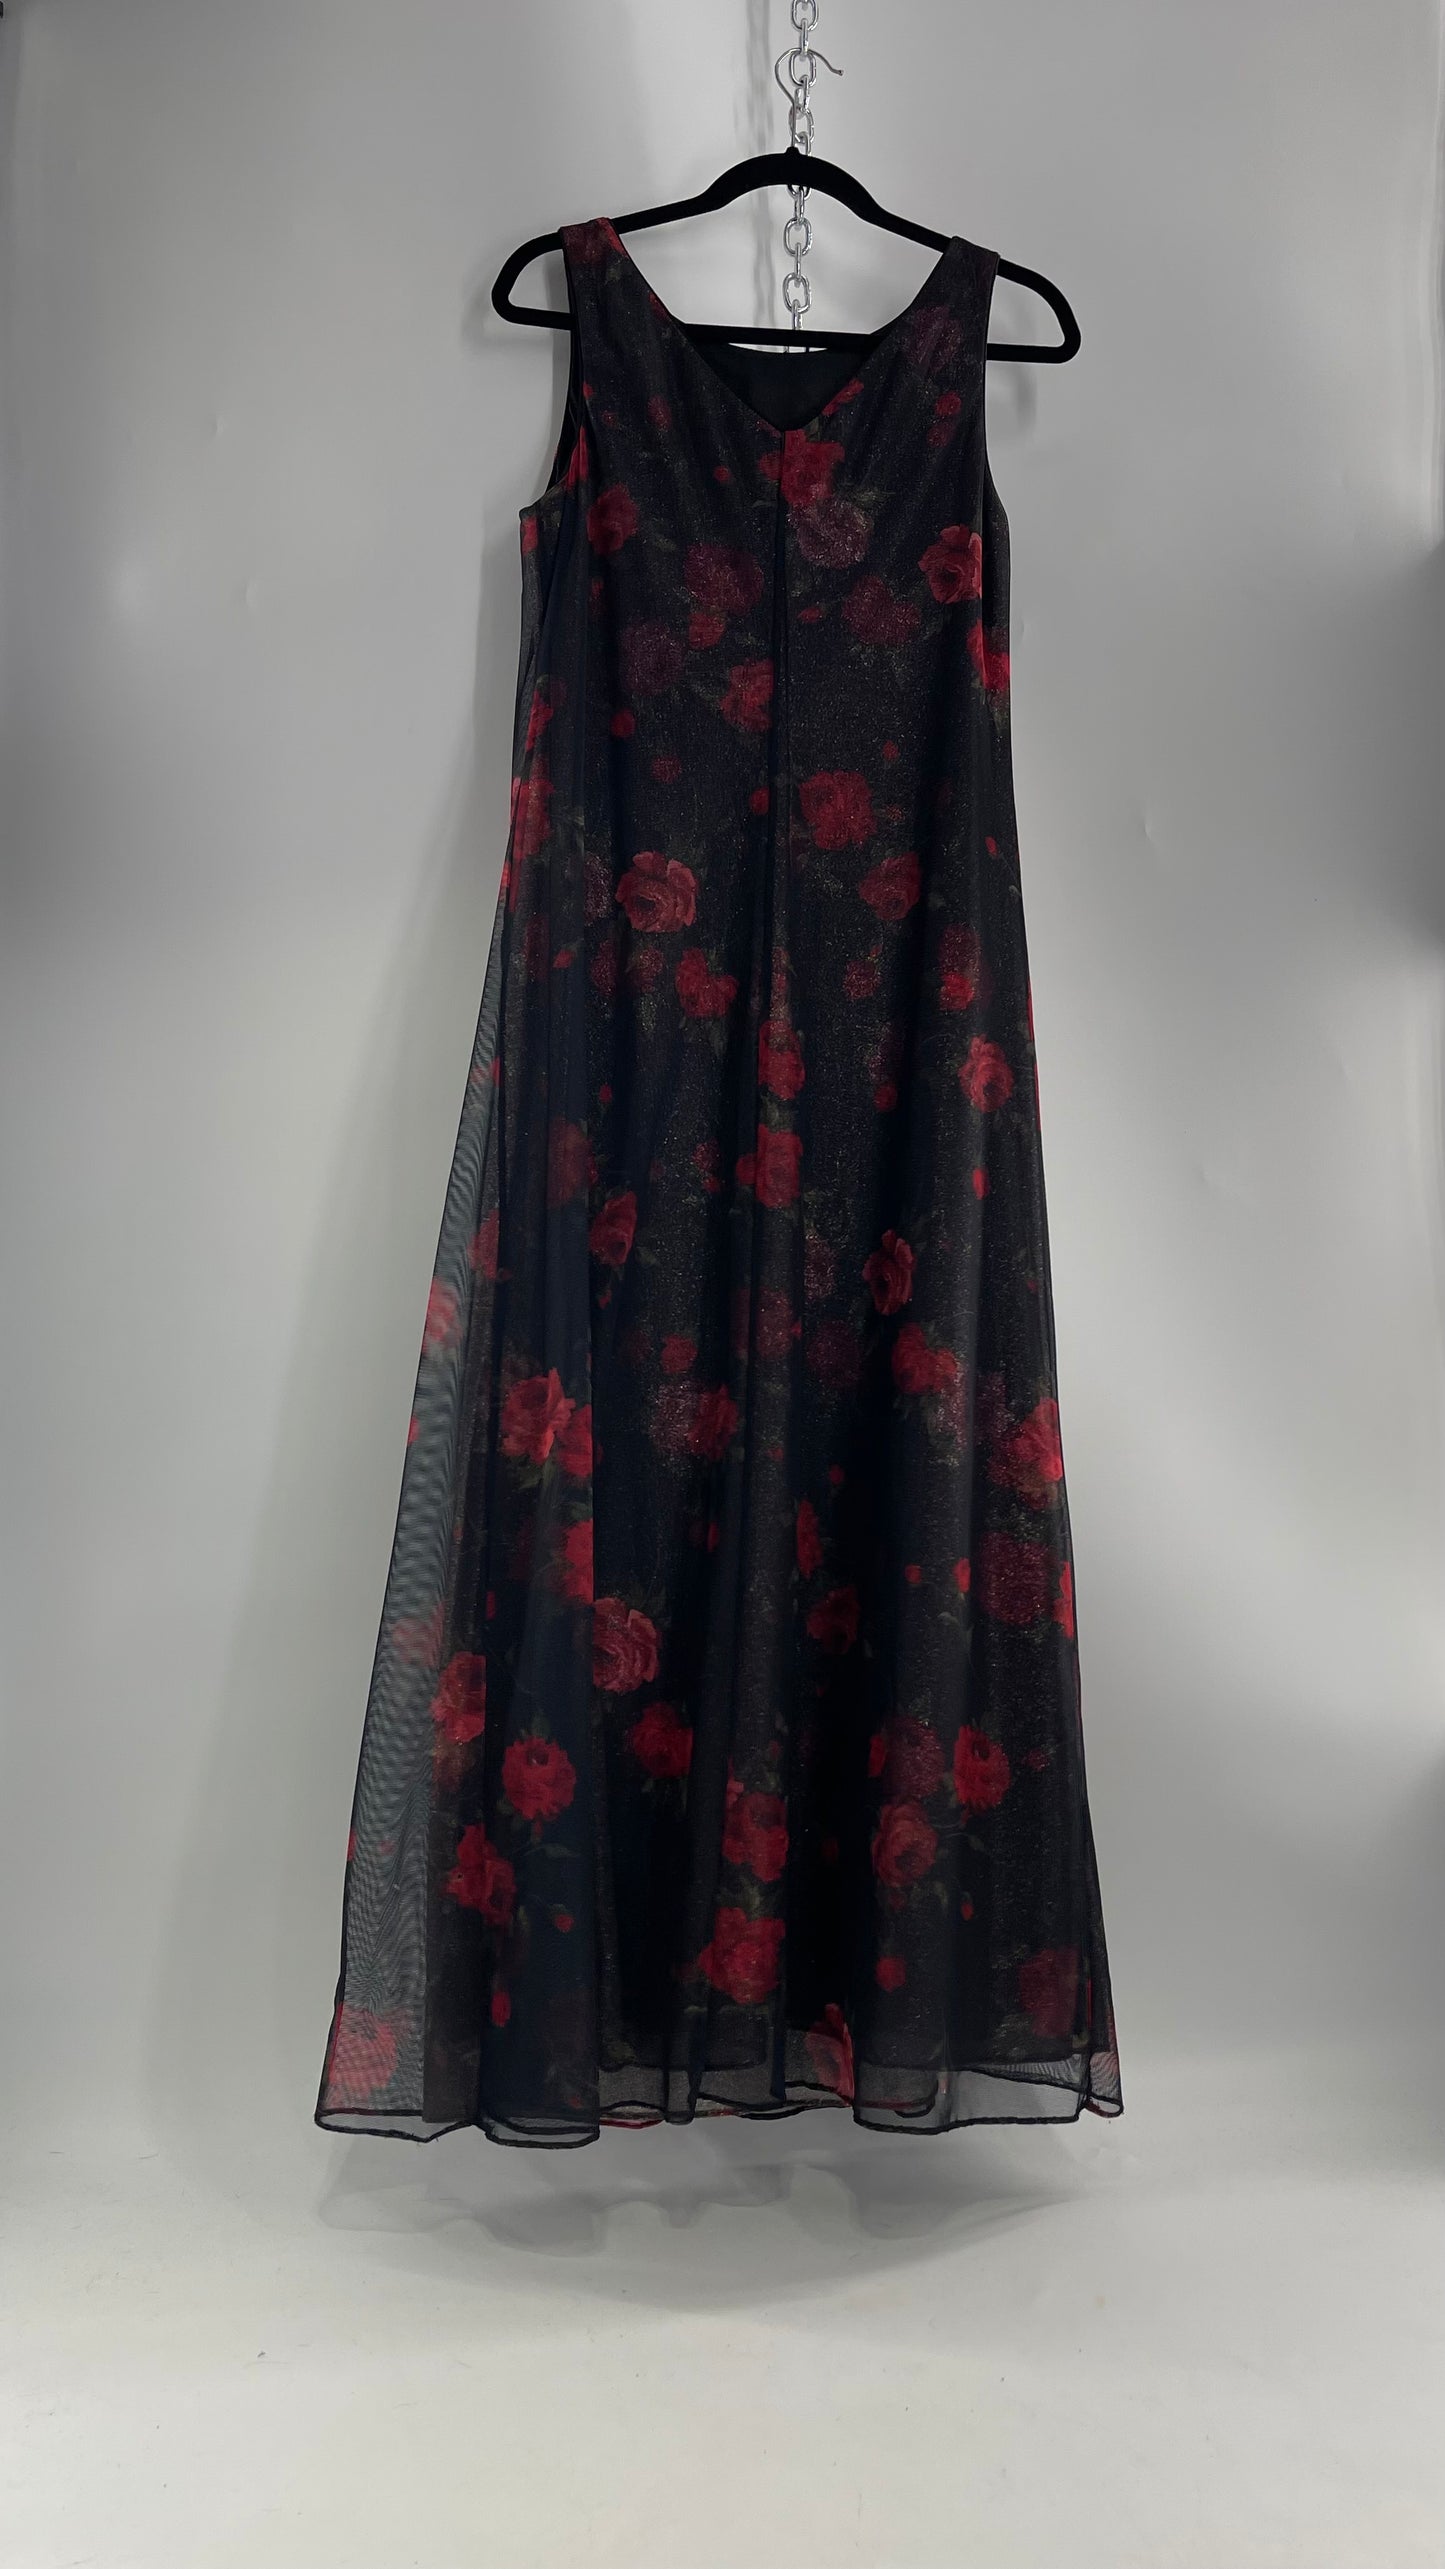 Vintage TEDDI EVENING Dress with Red Rose Layer Over Glitter Graphic and Black Base Layer (10)